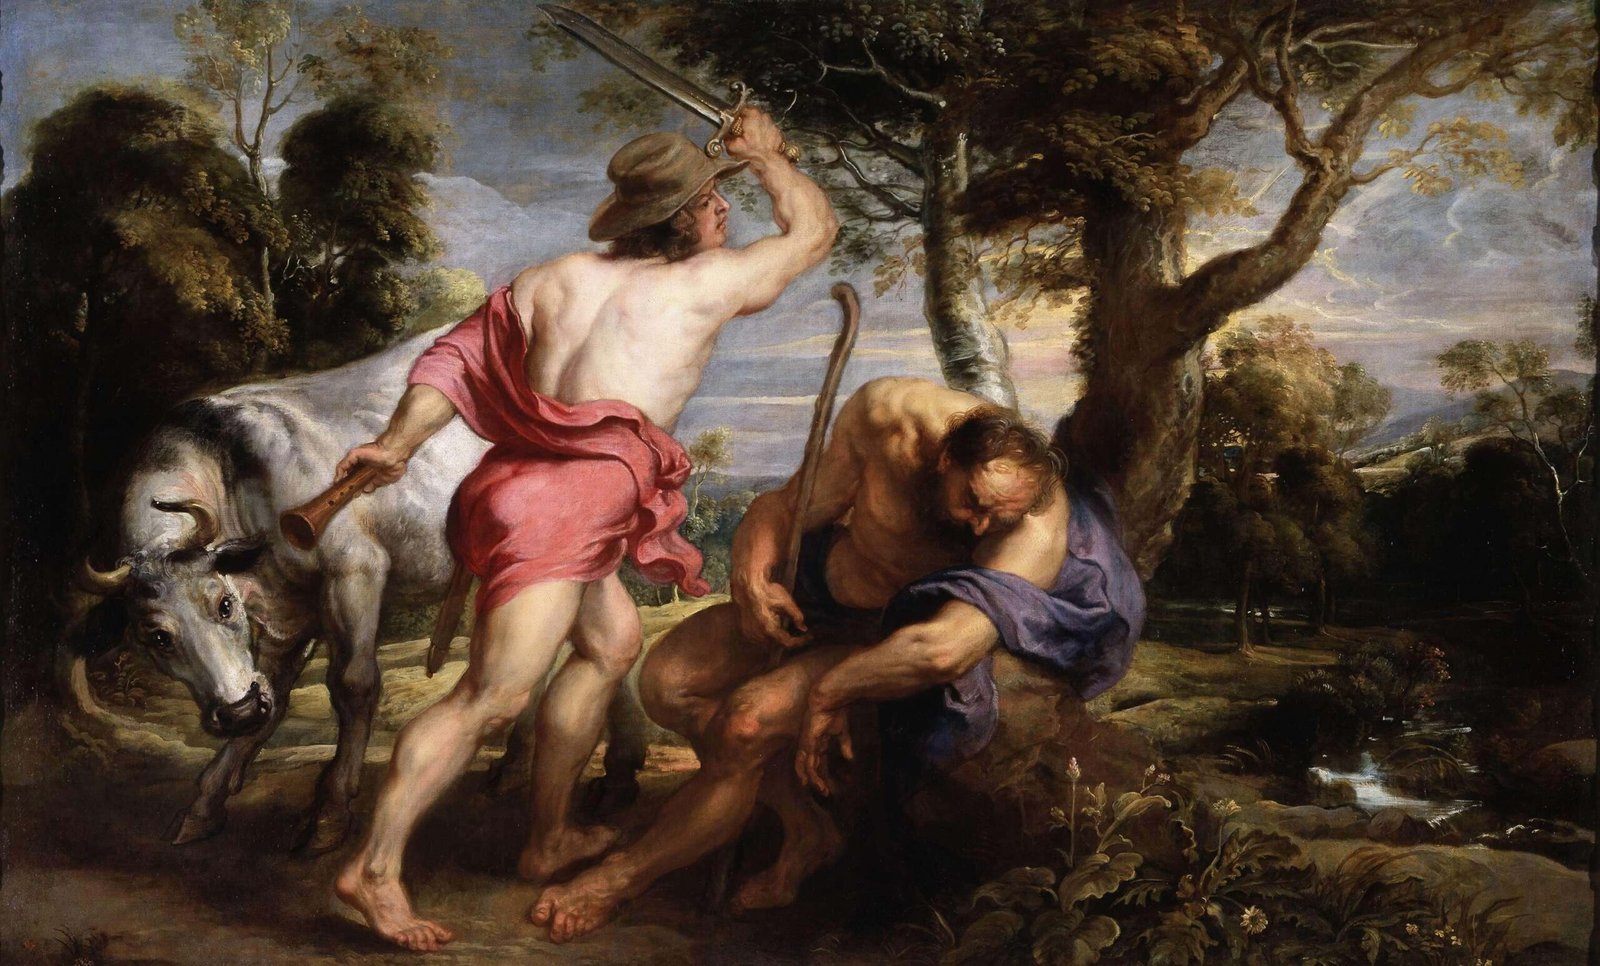 This painting represents Hermes performing the blow to decapitate Argus.